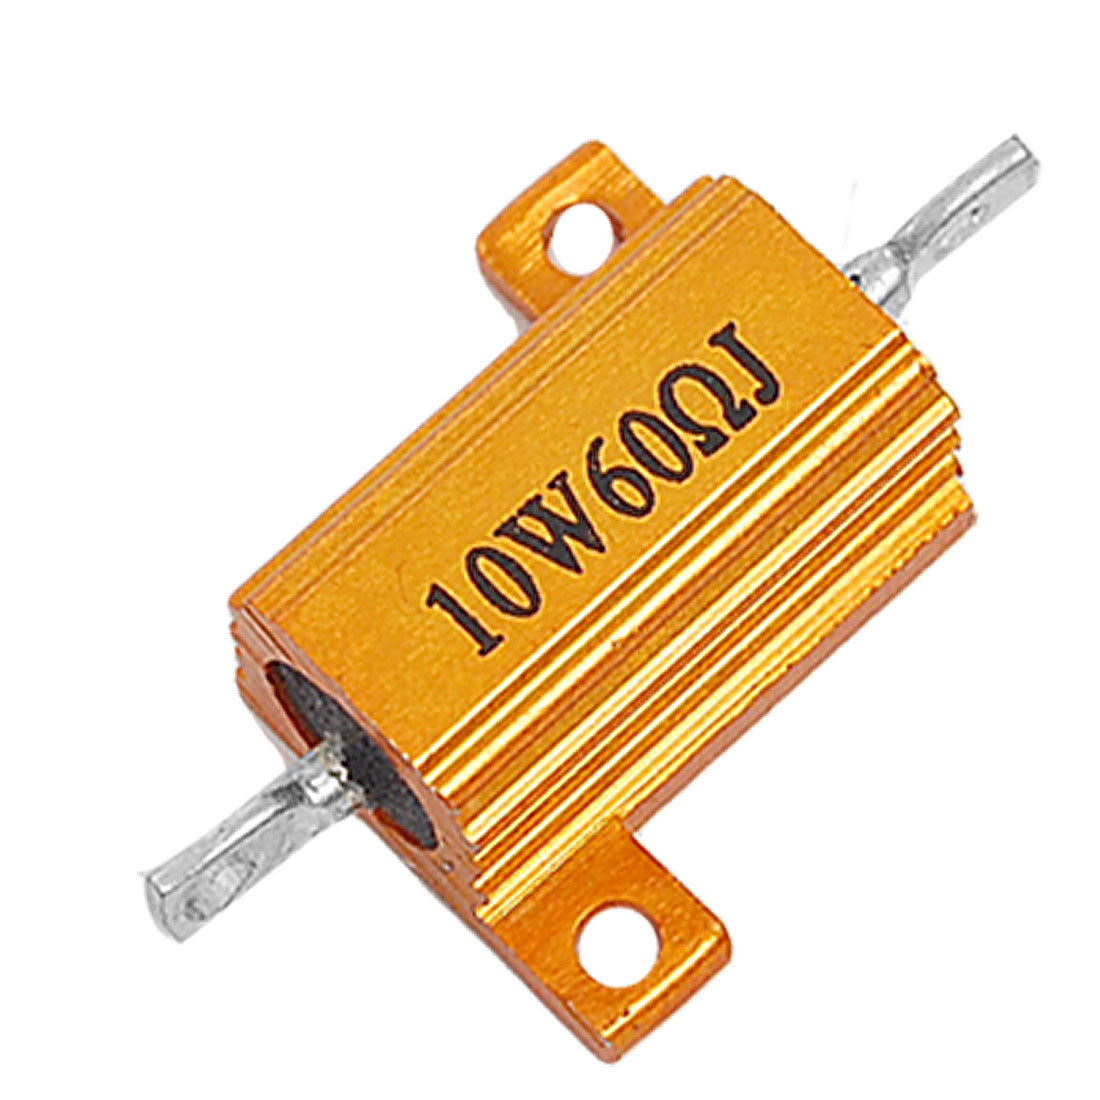 uxcell Uxcell 10W 5% 60 Ohm Resistance Value Screw Tabs Aluminum Case Resistor